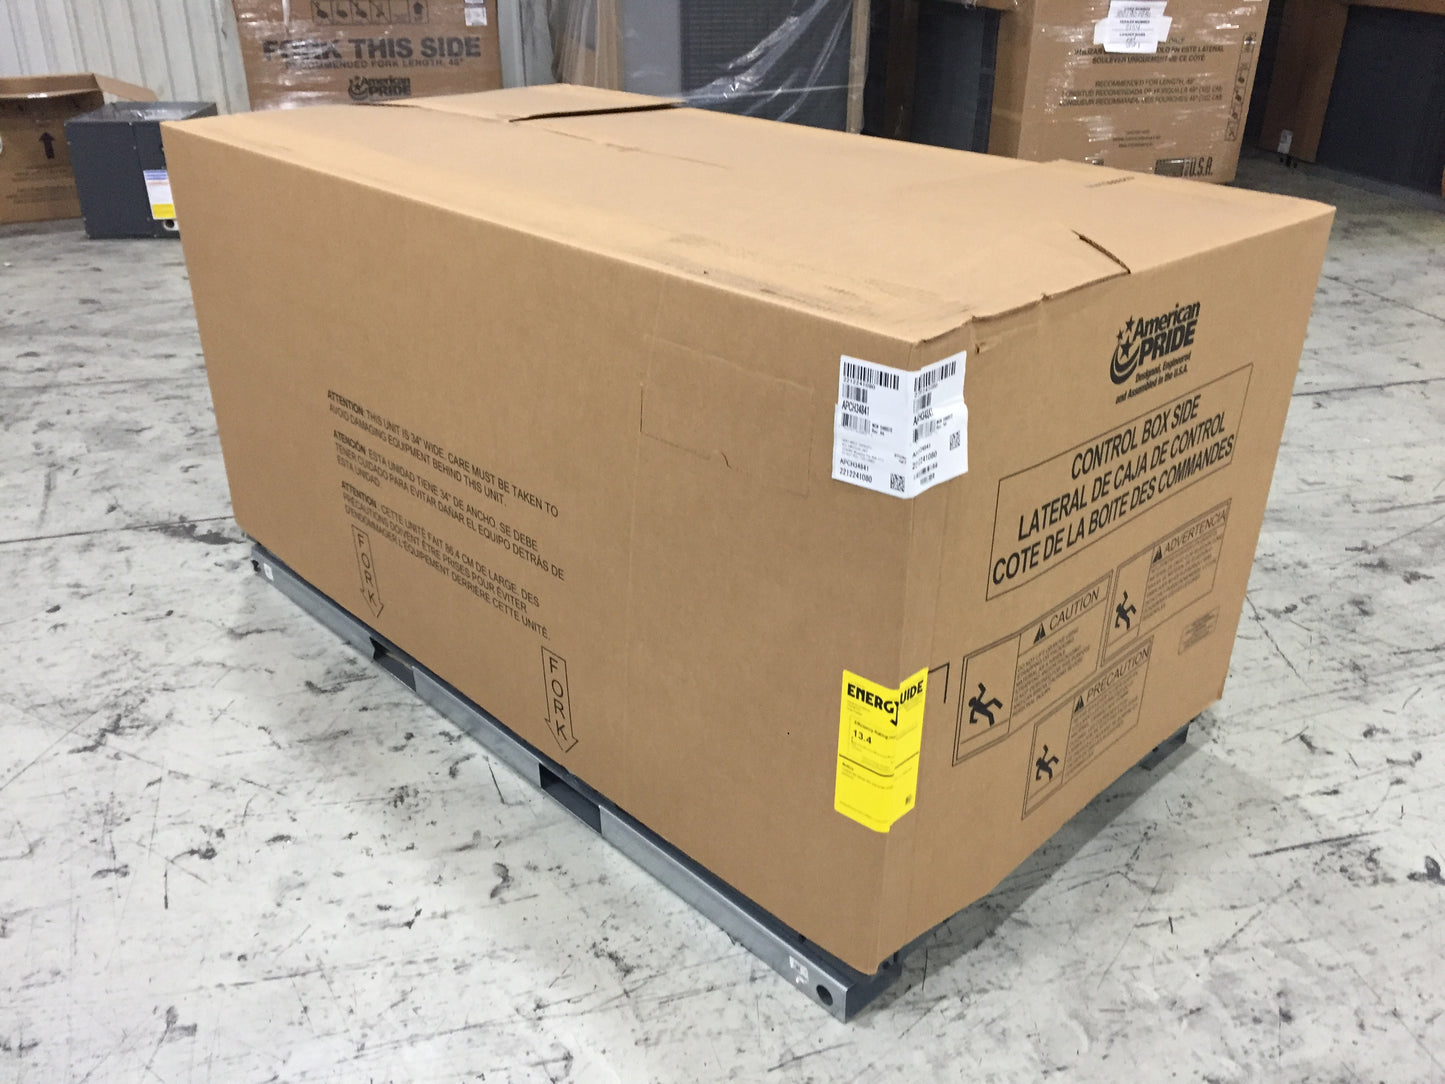 4 TON HORIZONTAL PACKAGED AIR CONDITIONING UNIT, 13.4 SEER, 208-230/60/1, R401A